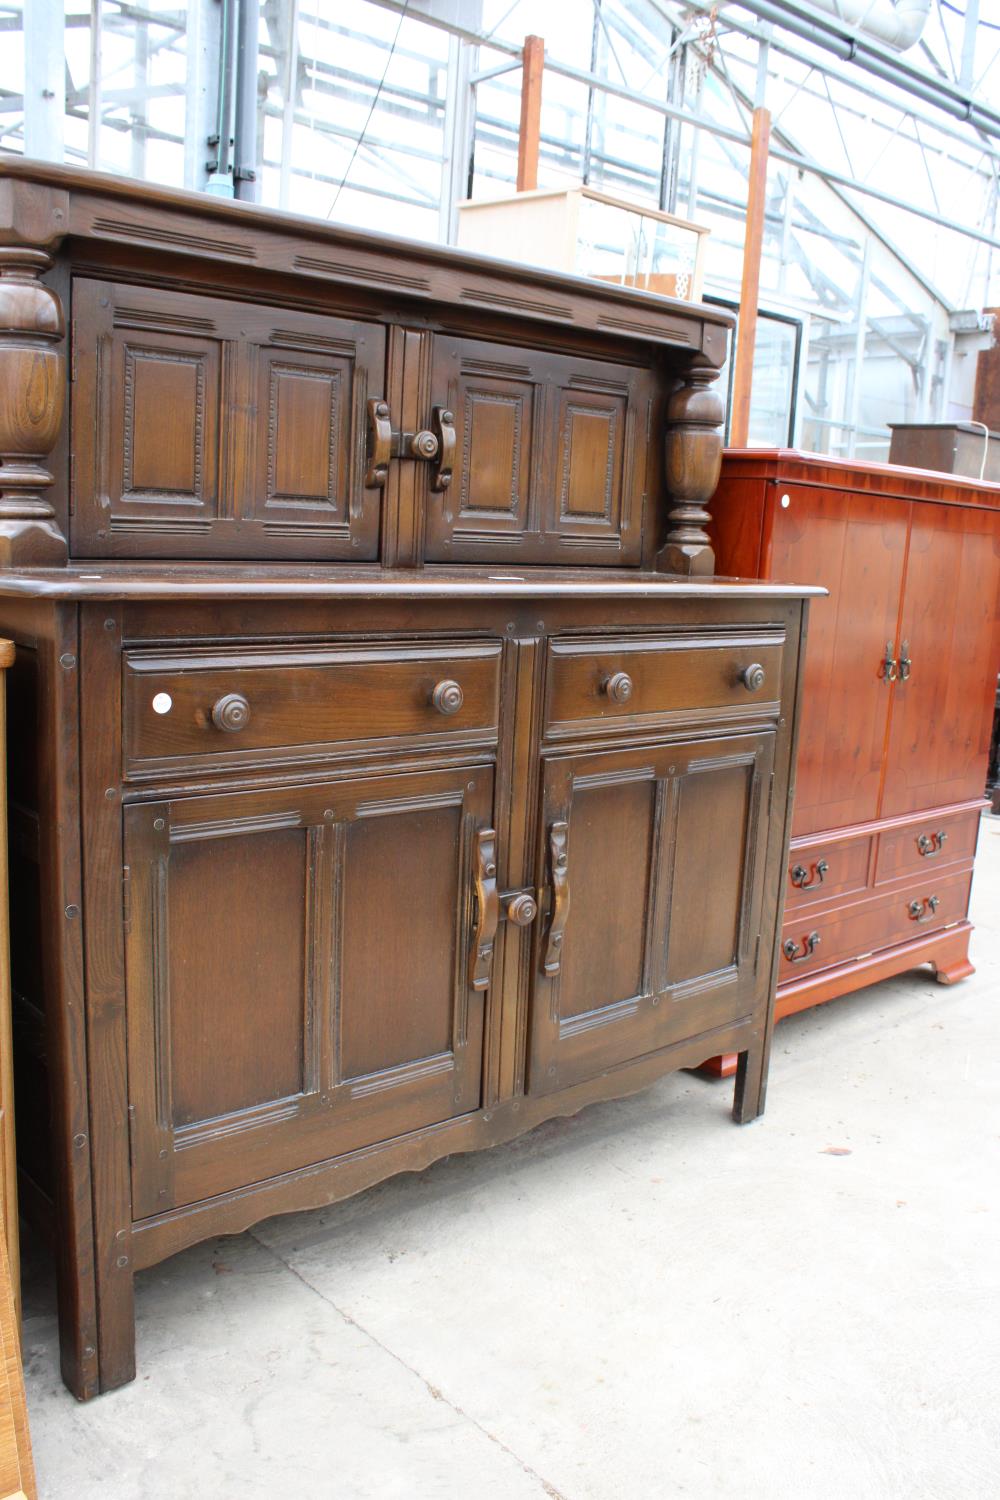 AN ERCOL BLUE LABEL COURT CUPBOARD - 48" WIDE - Image 2 of 4